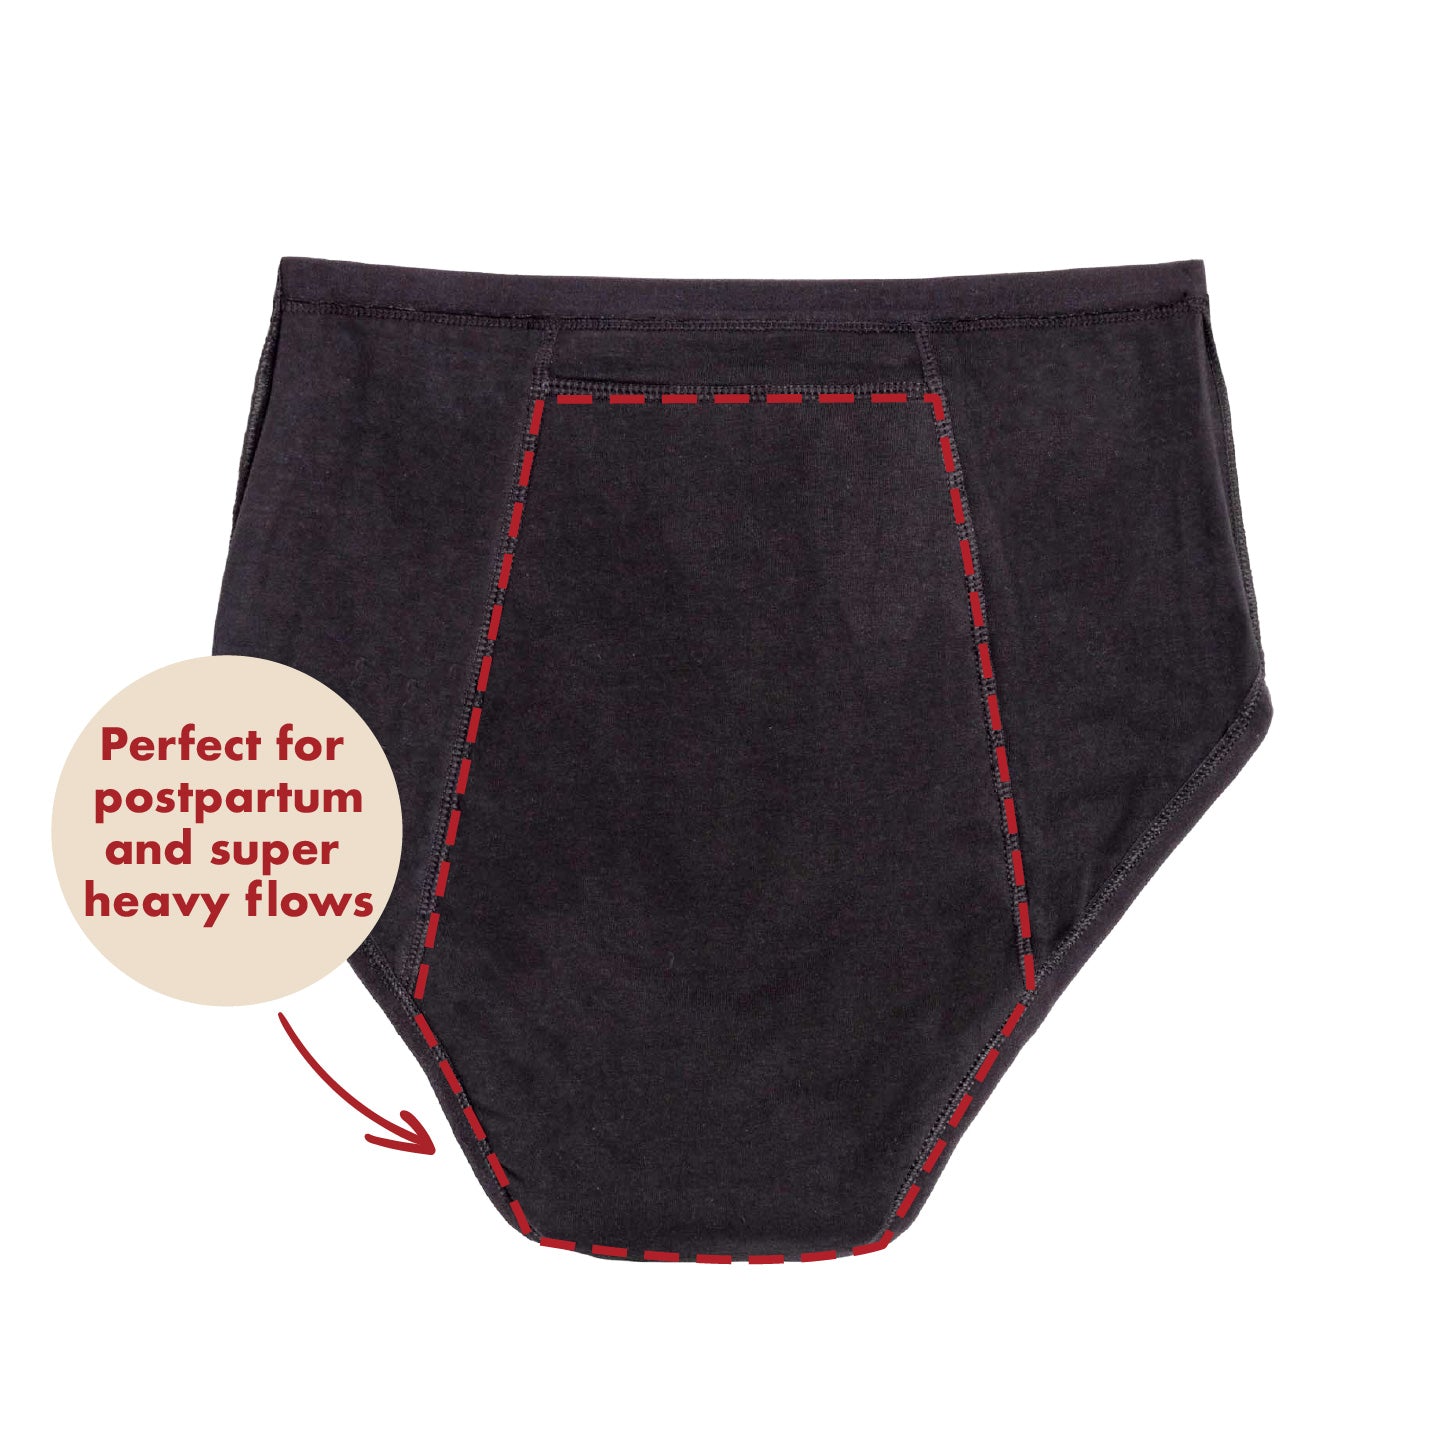 The High Waisted Period. in Organic Cotton For Heavy Flows – The